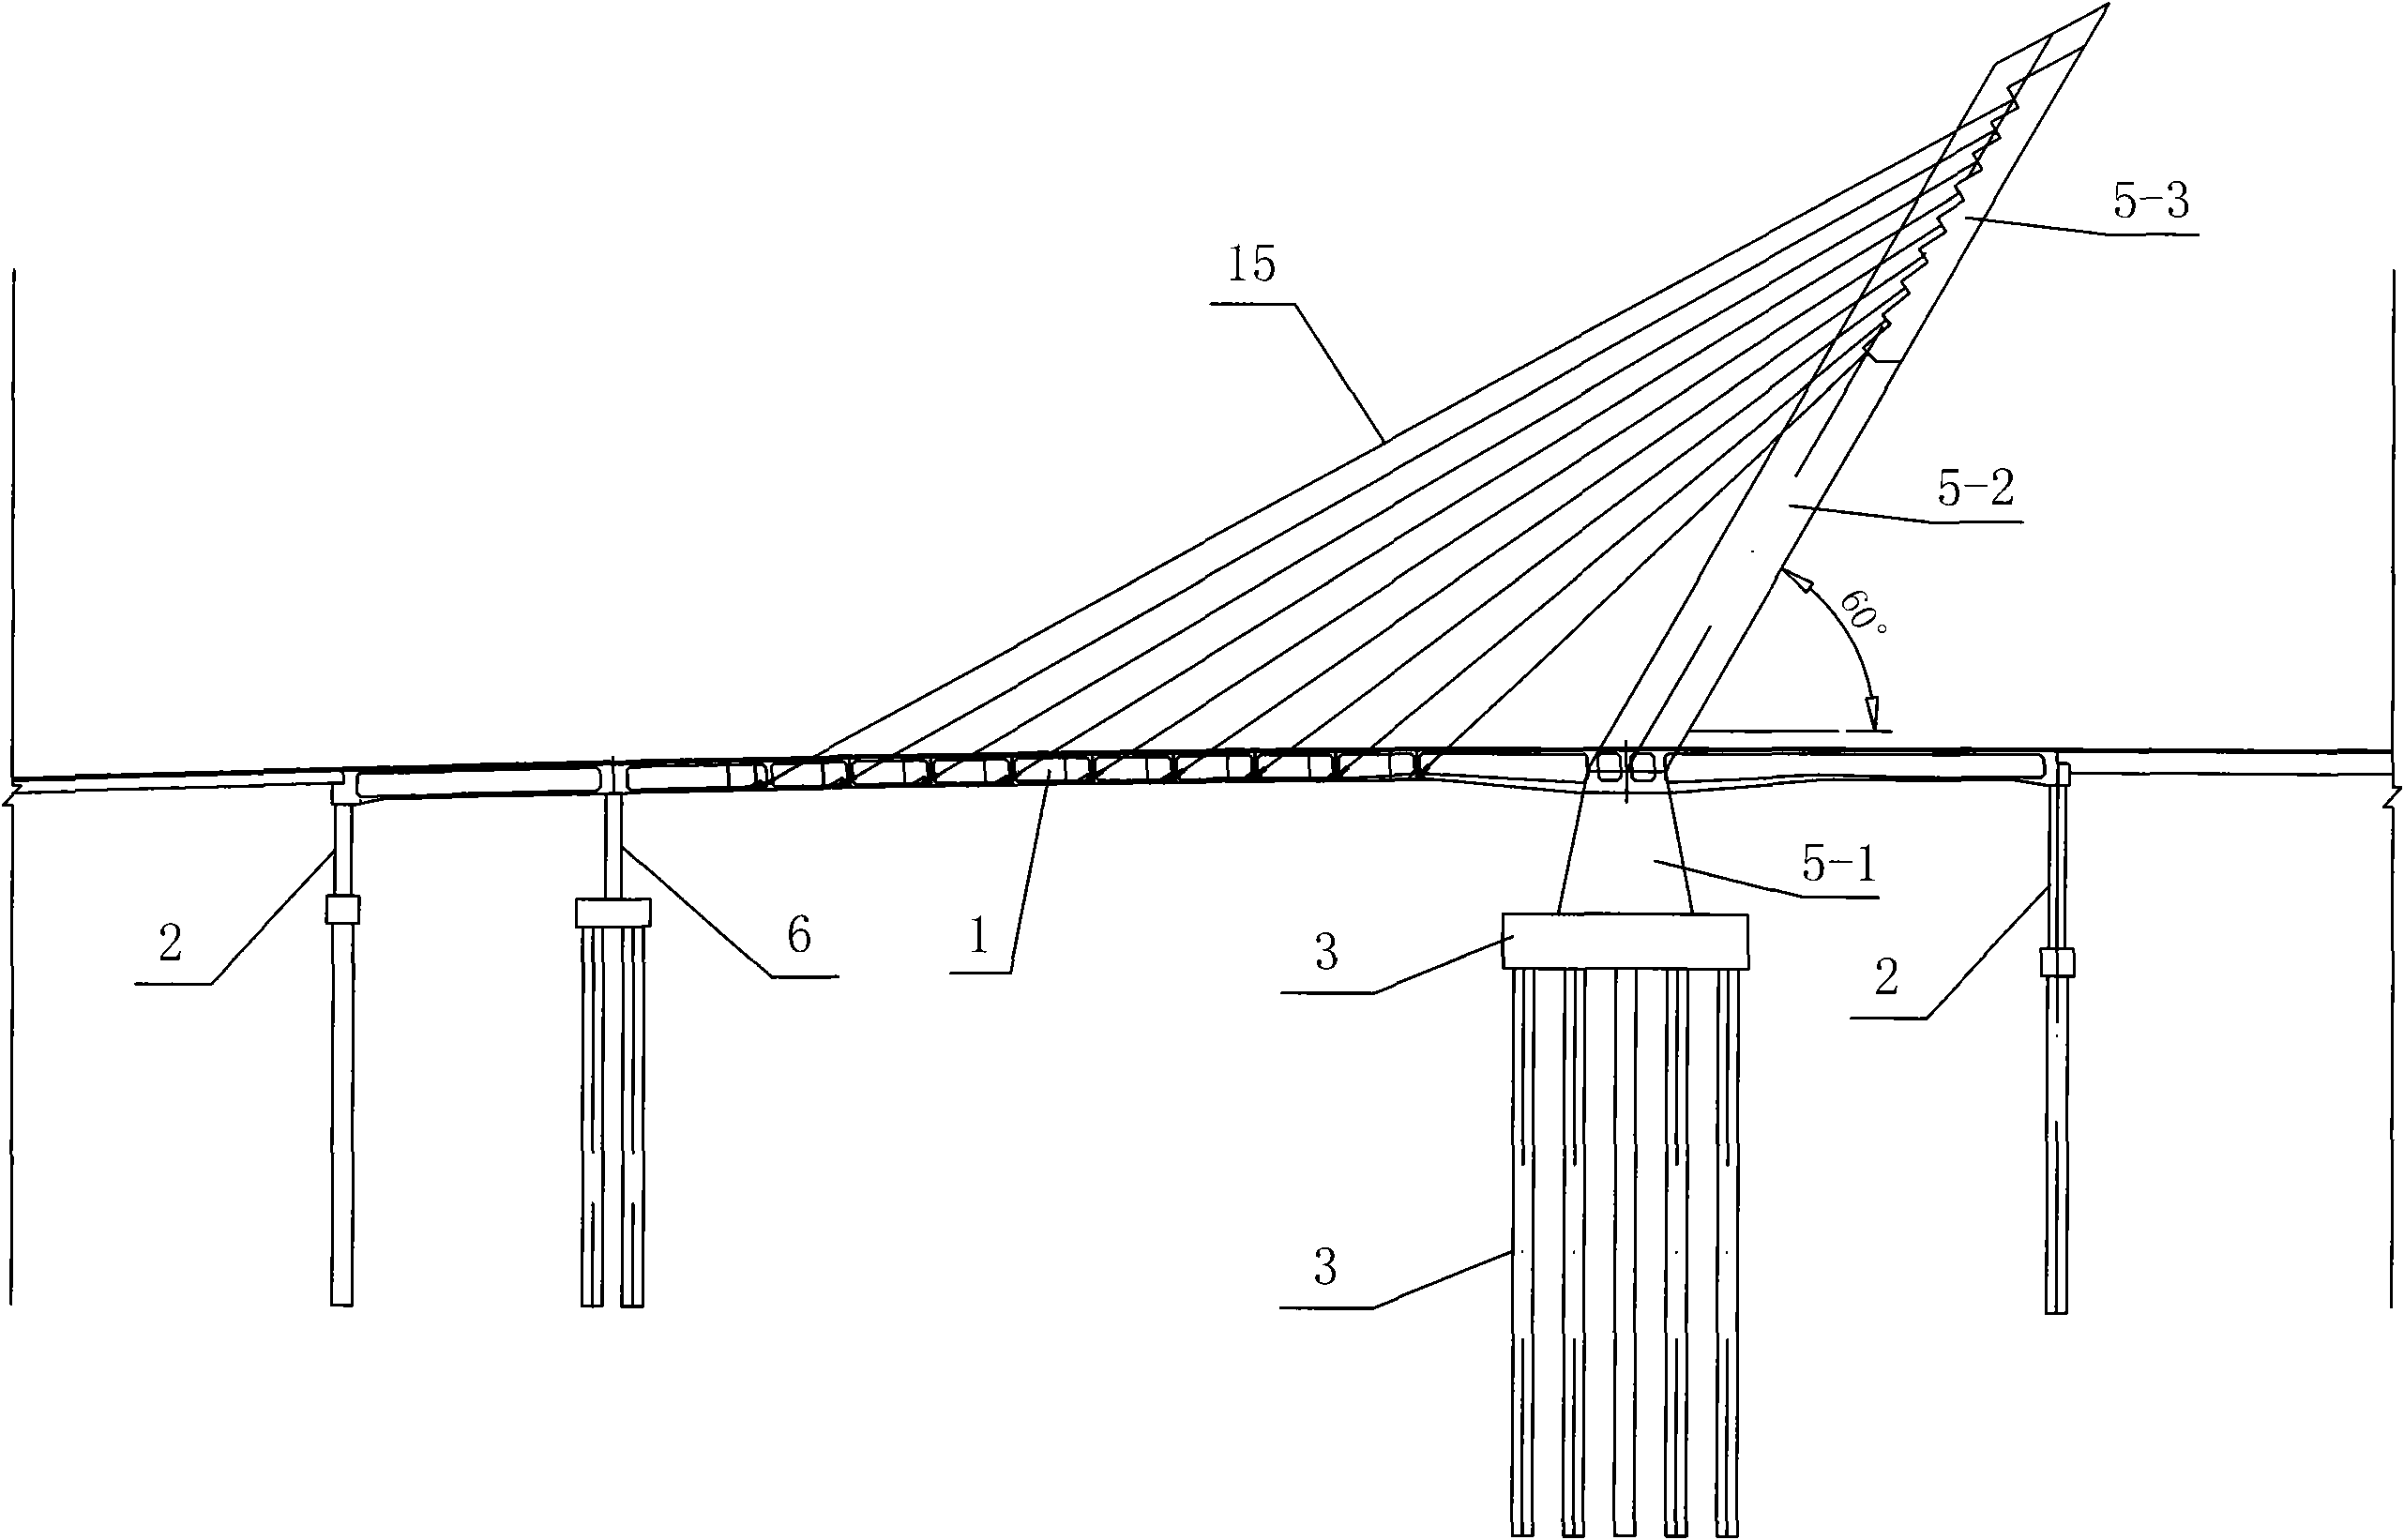 Construction method of single-pylon cable-stayed bridge without dorsal cables